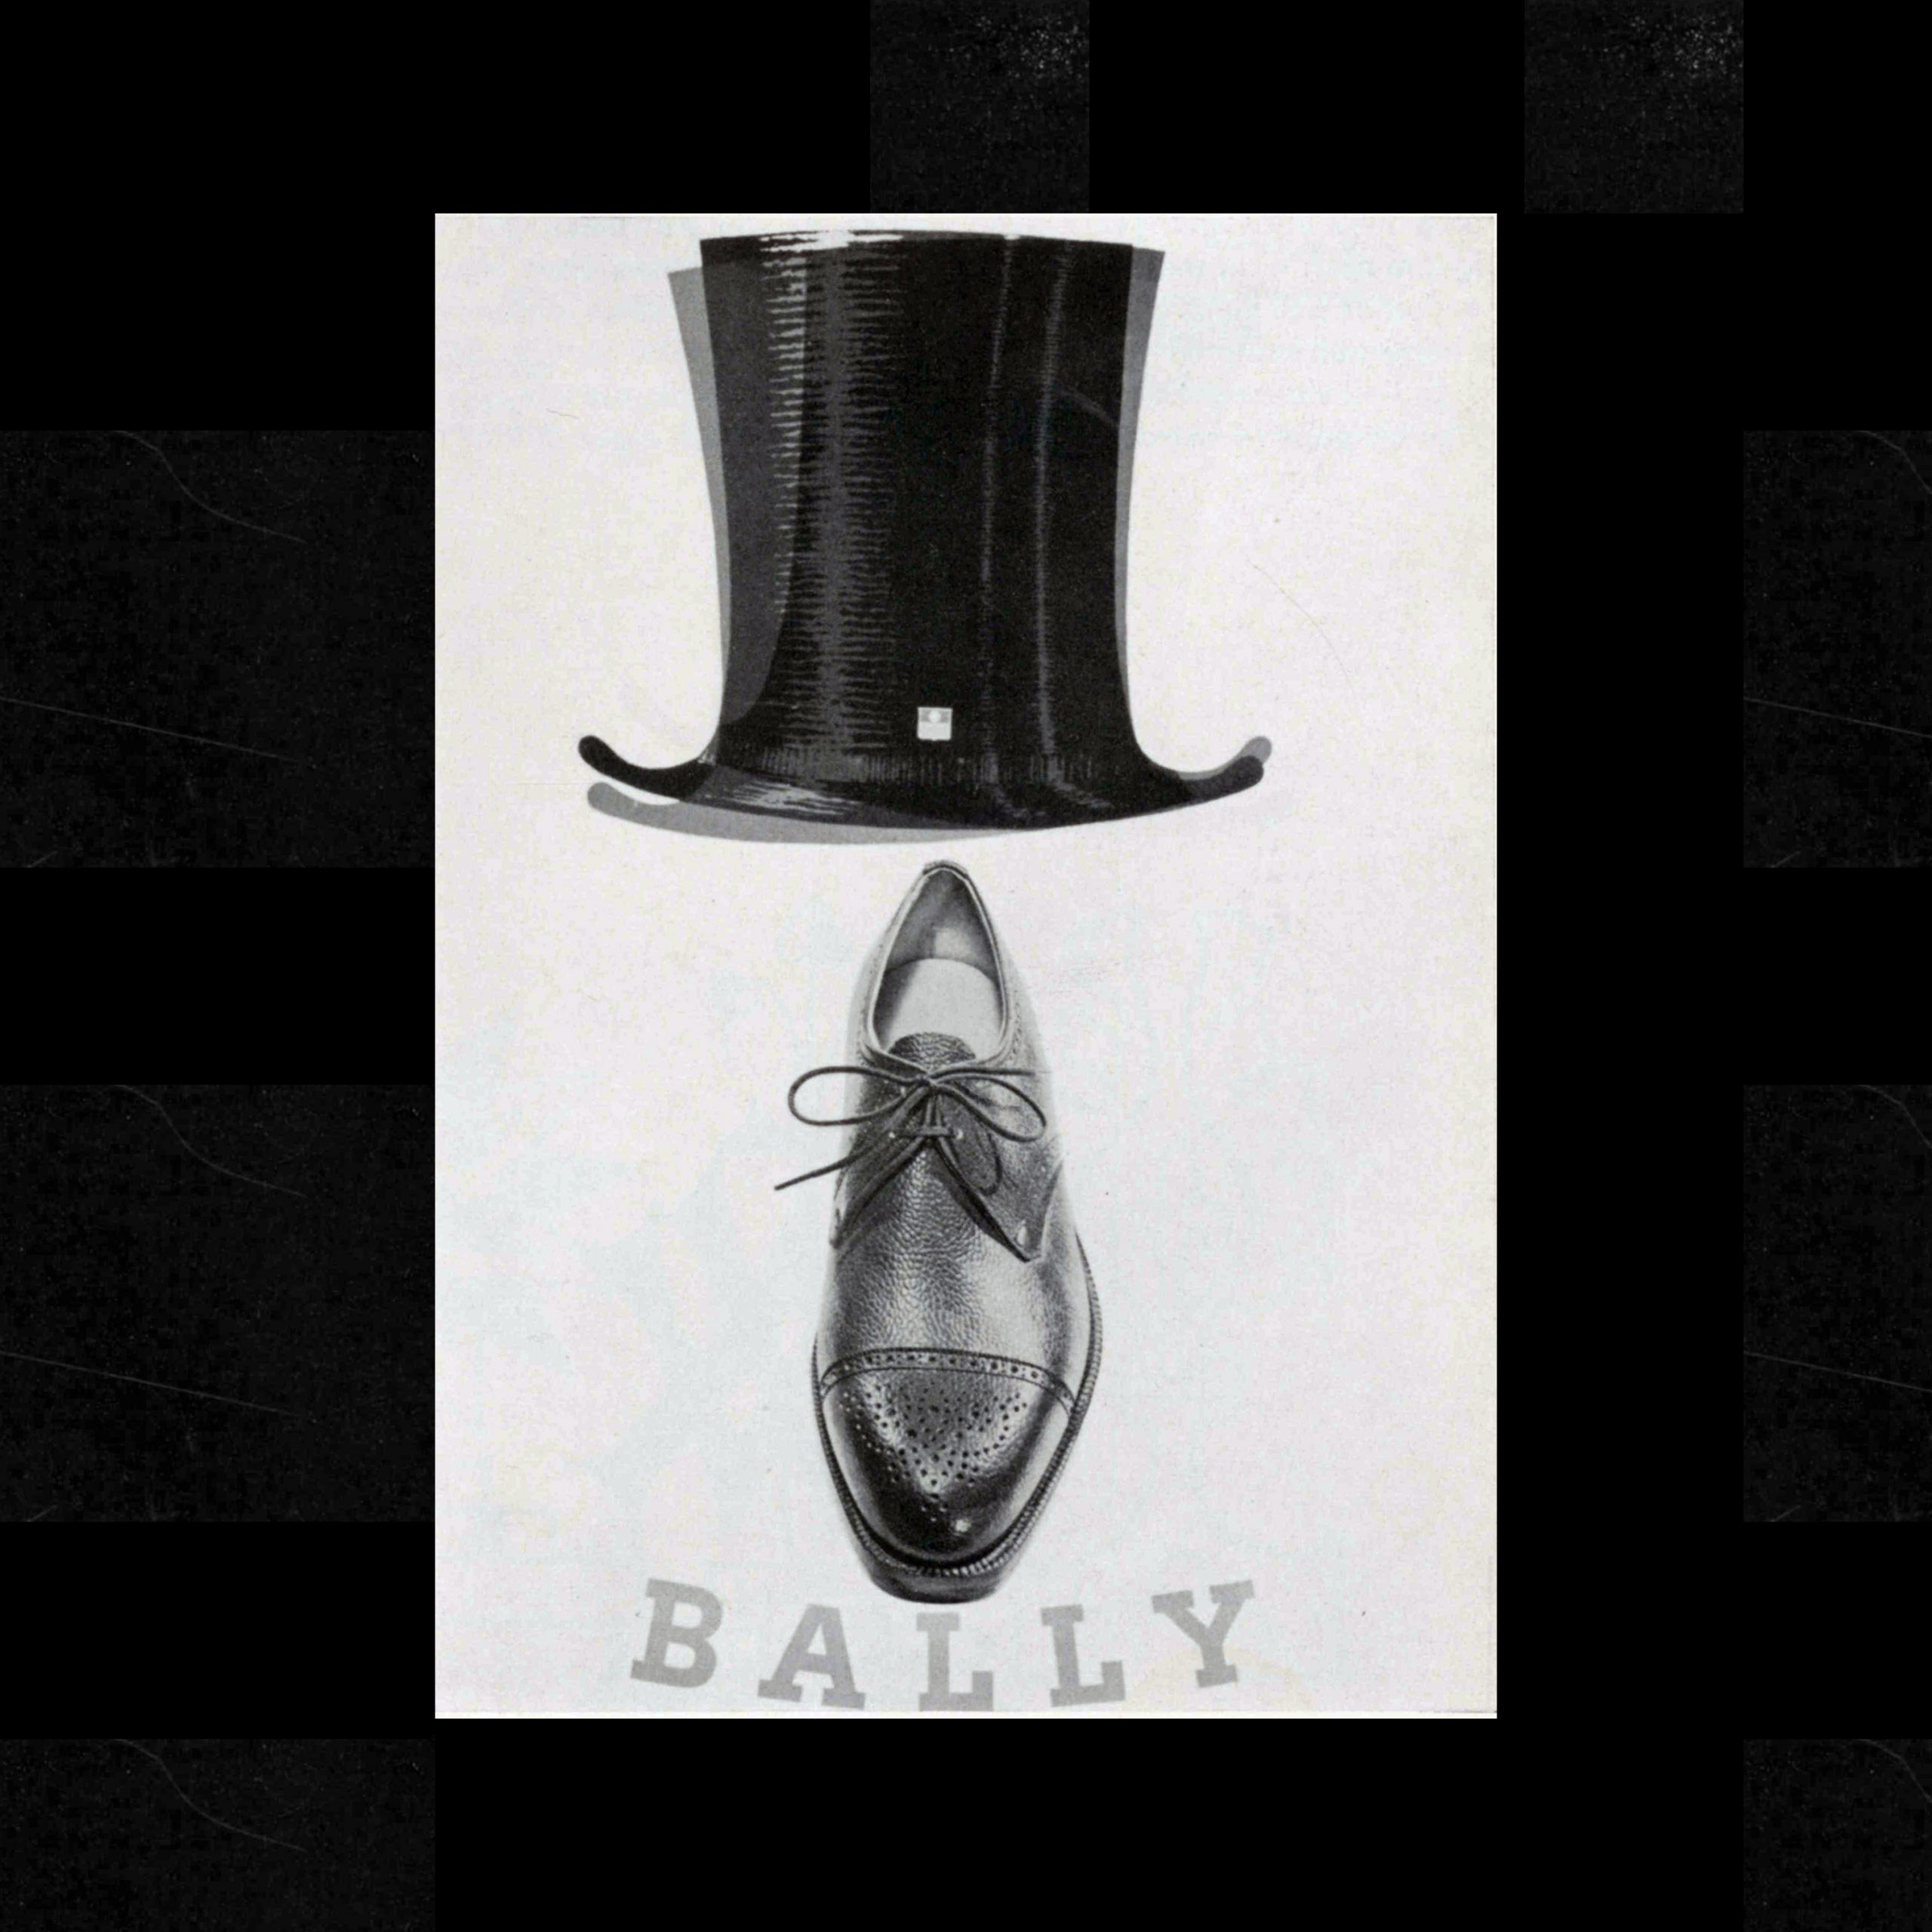 Poster for Bally Men's Shoes designed by Pierre Augsburger